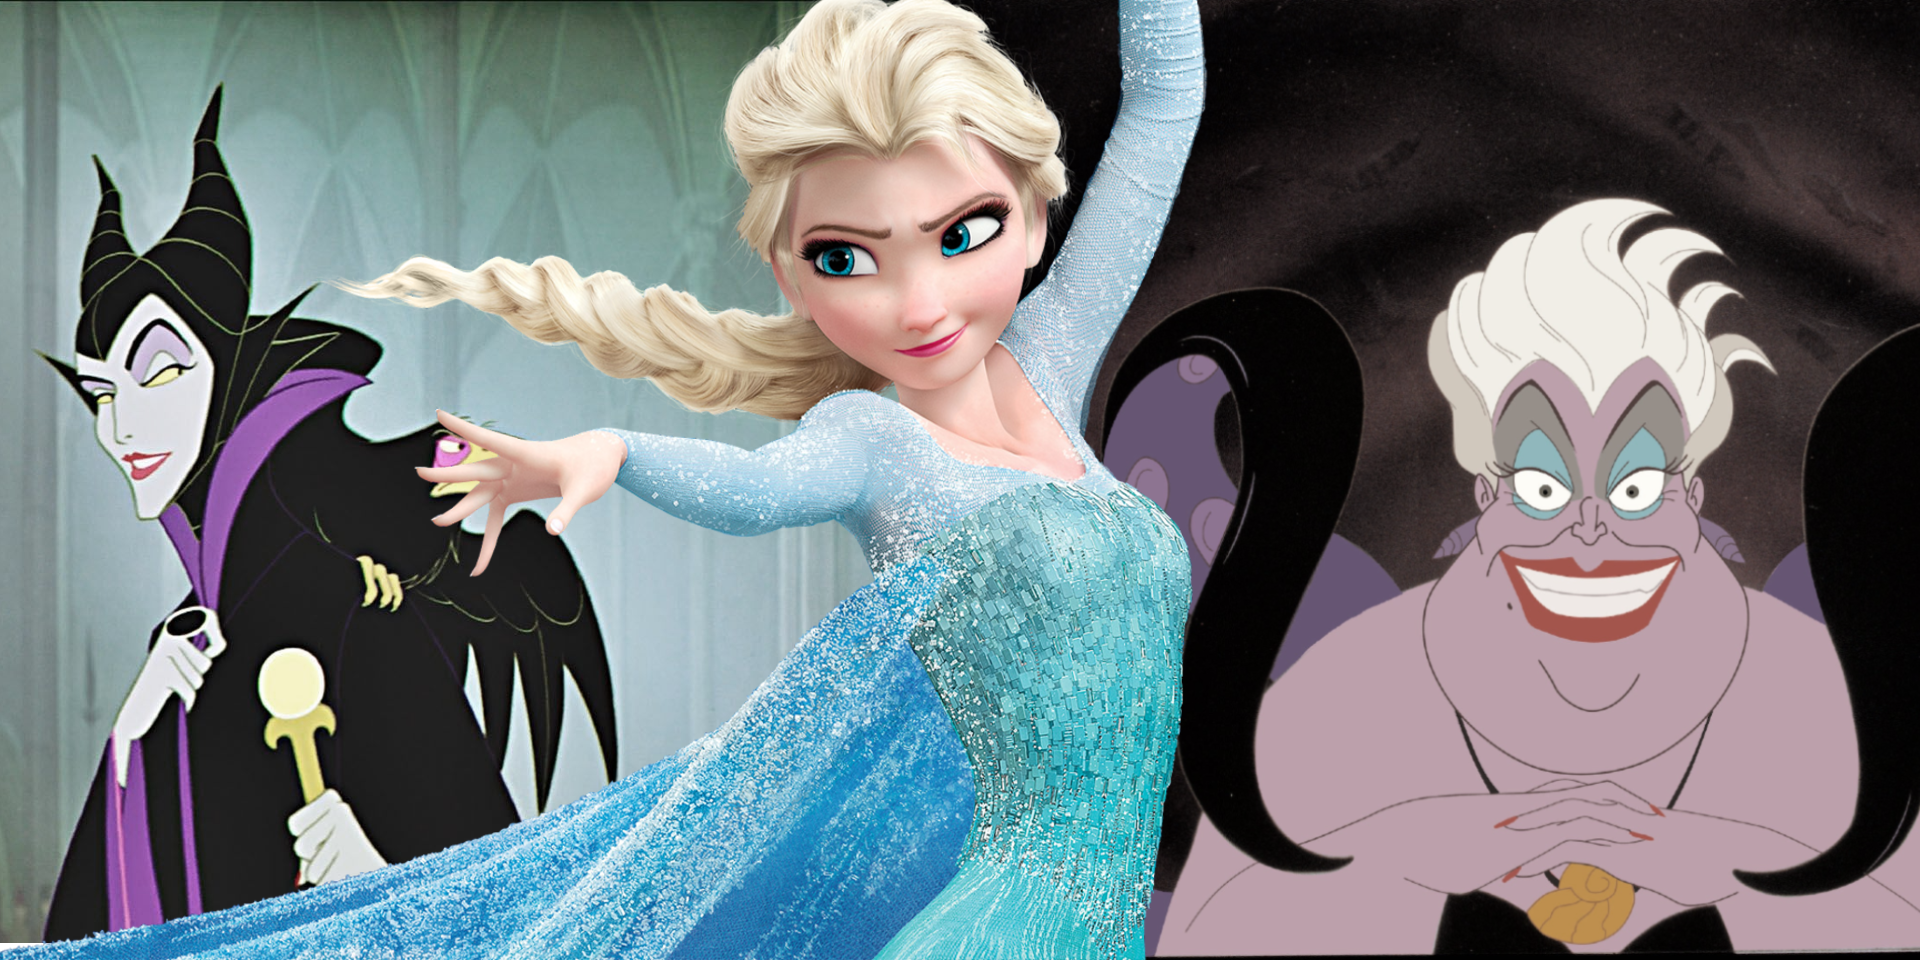 Frozen Elsa S Powers Prevent Her From Being An Official Disney Princess